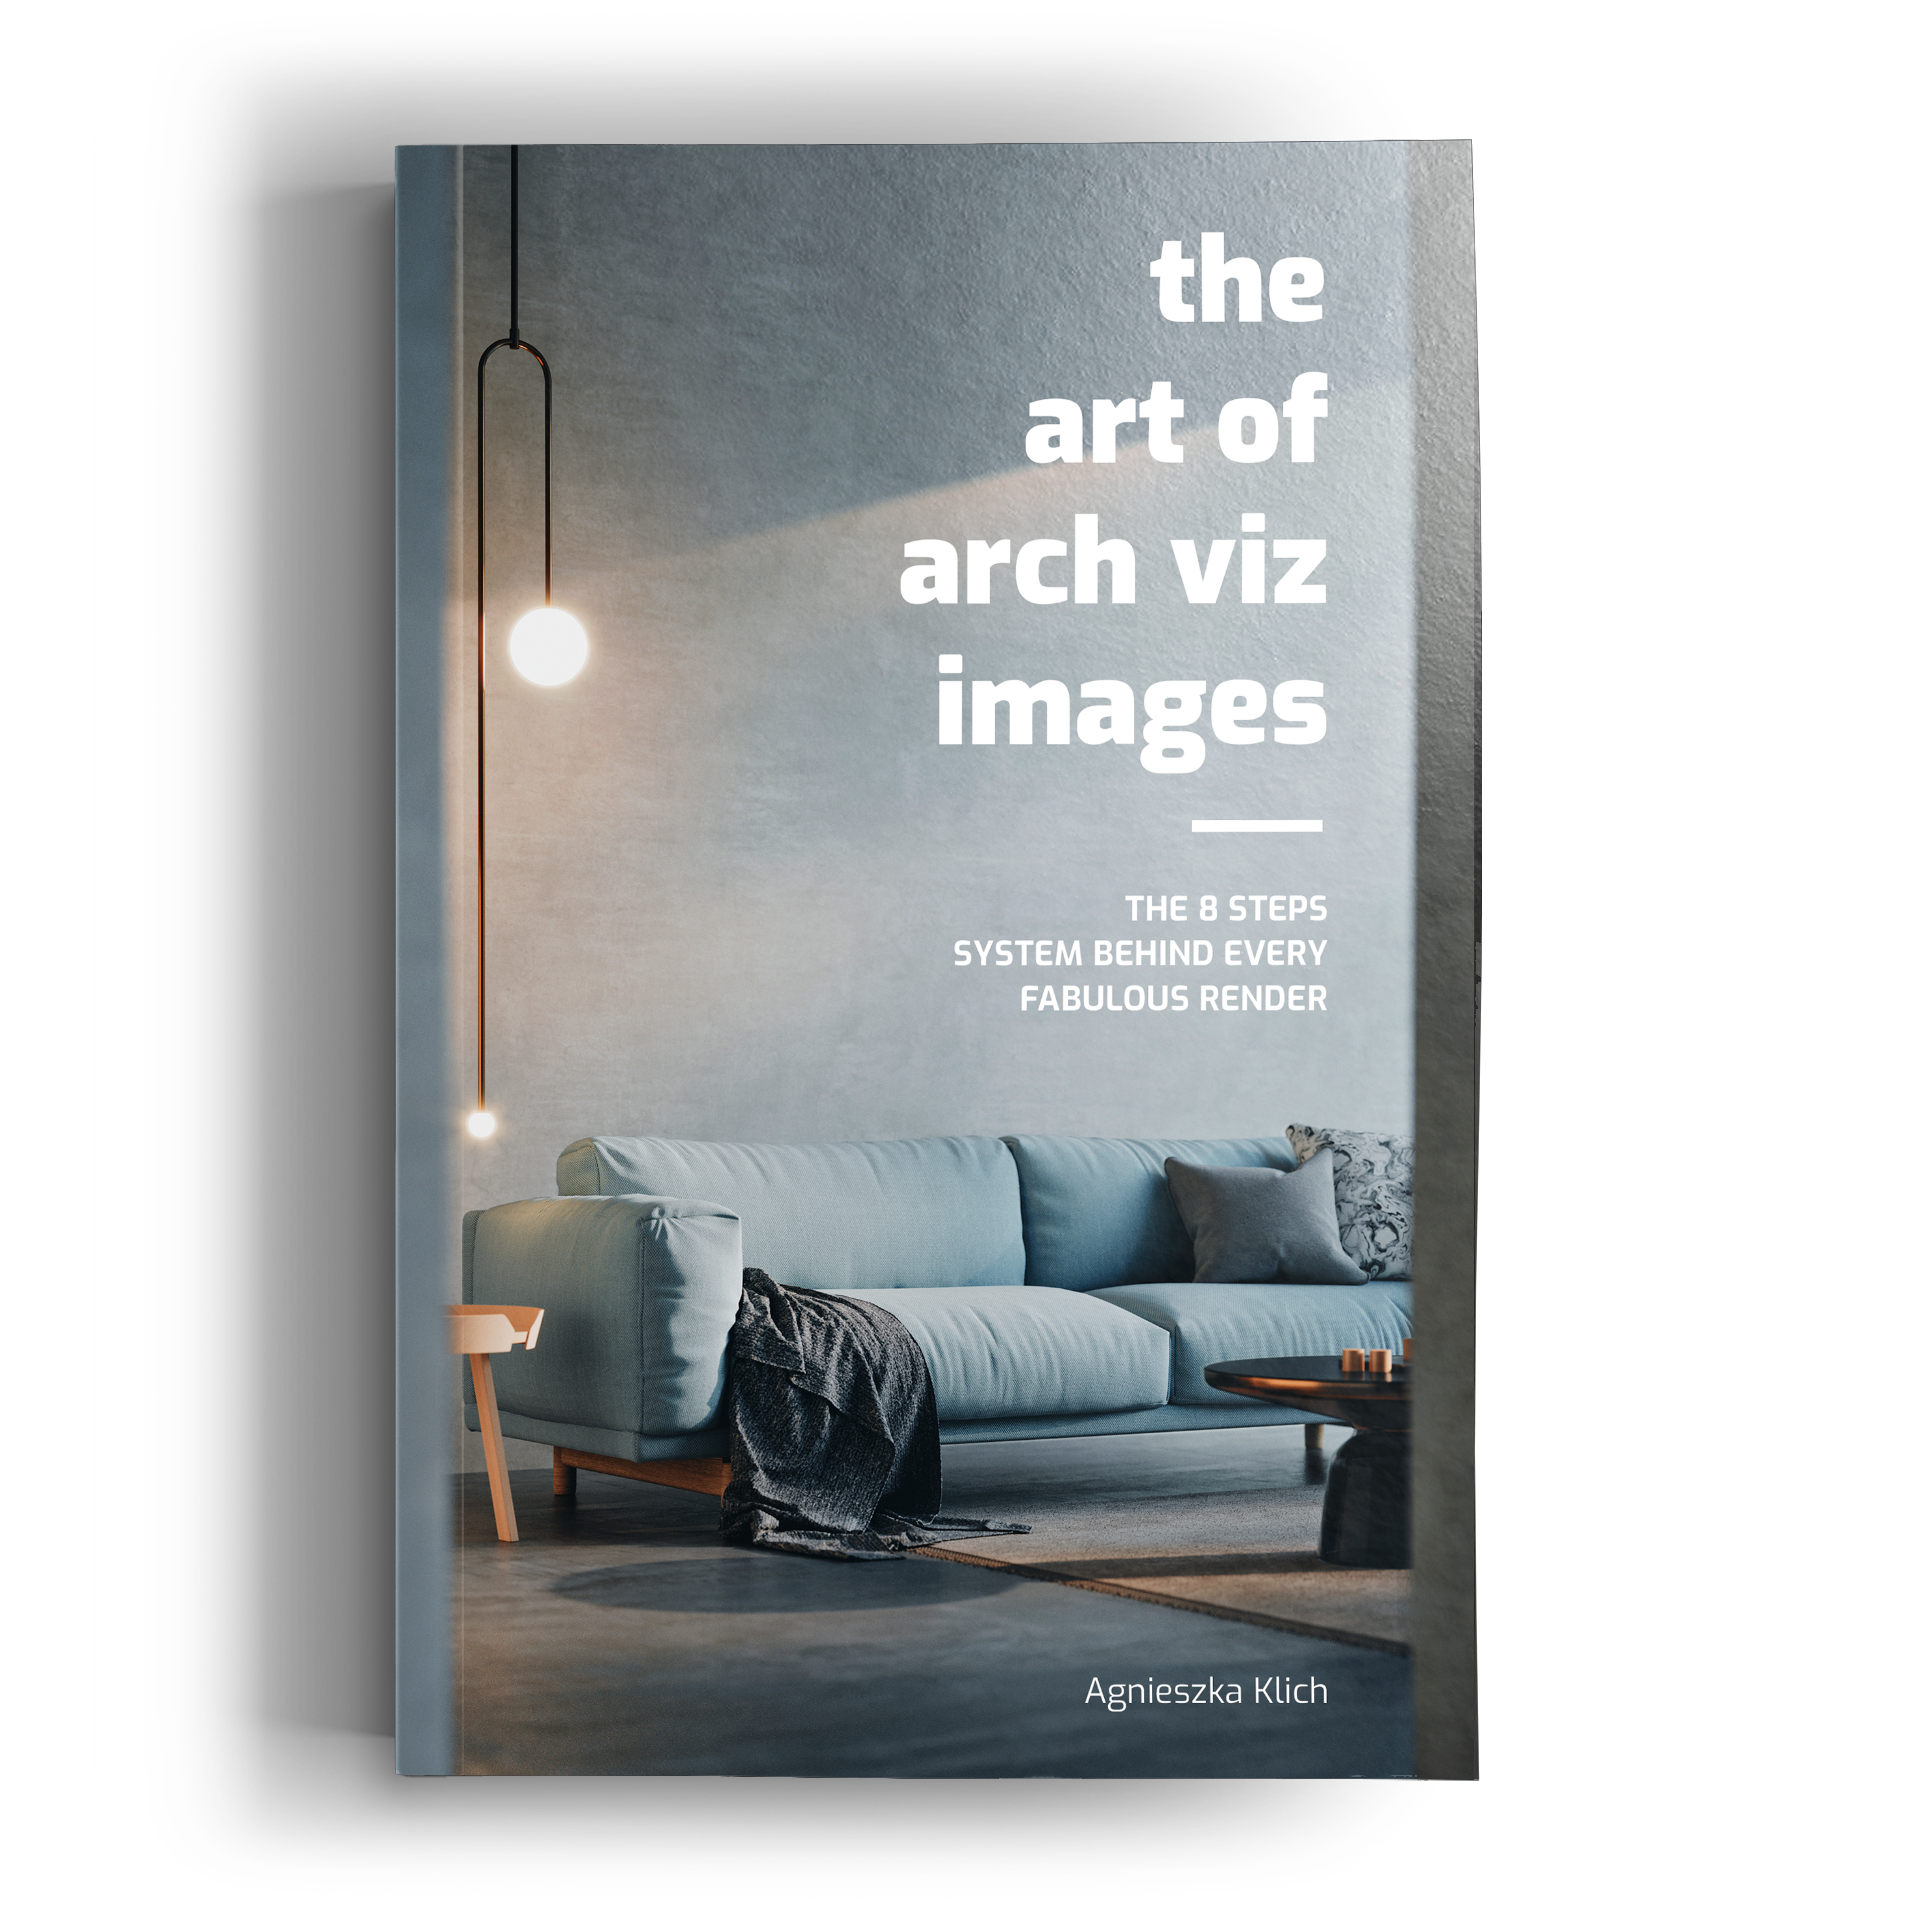 Book "The art of arch viz images"